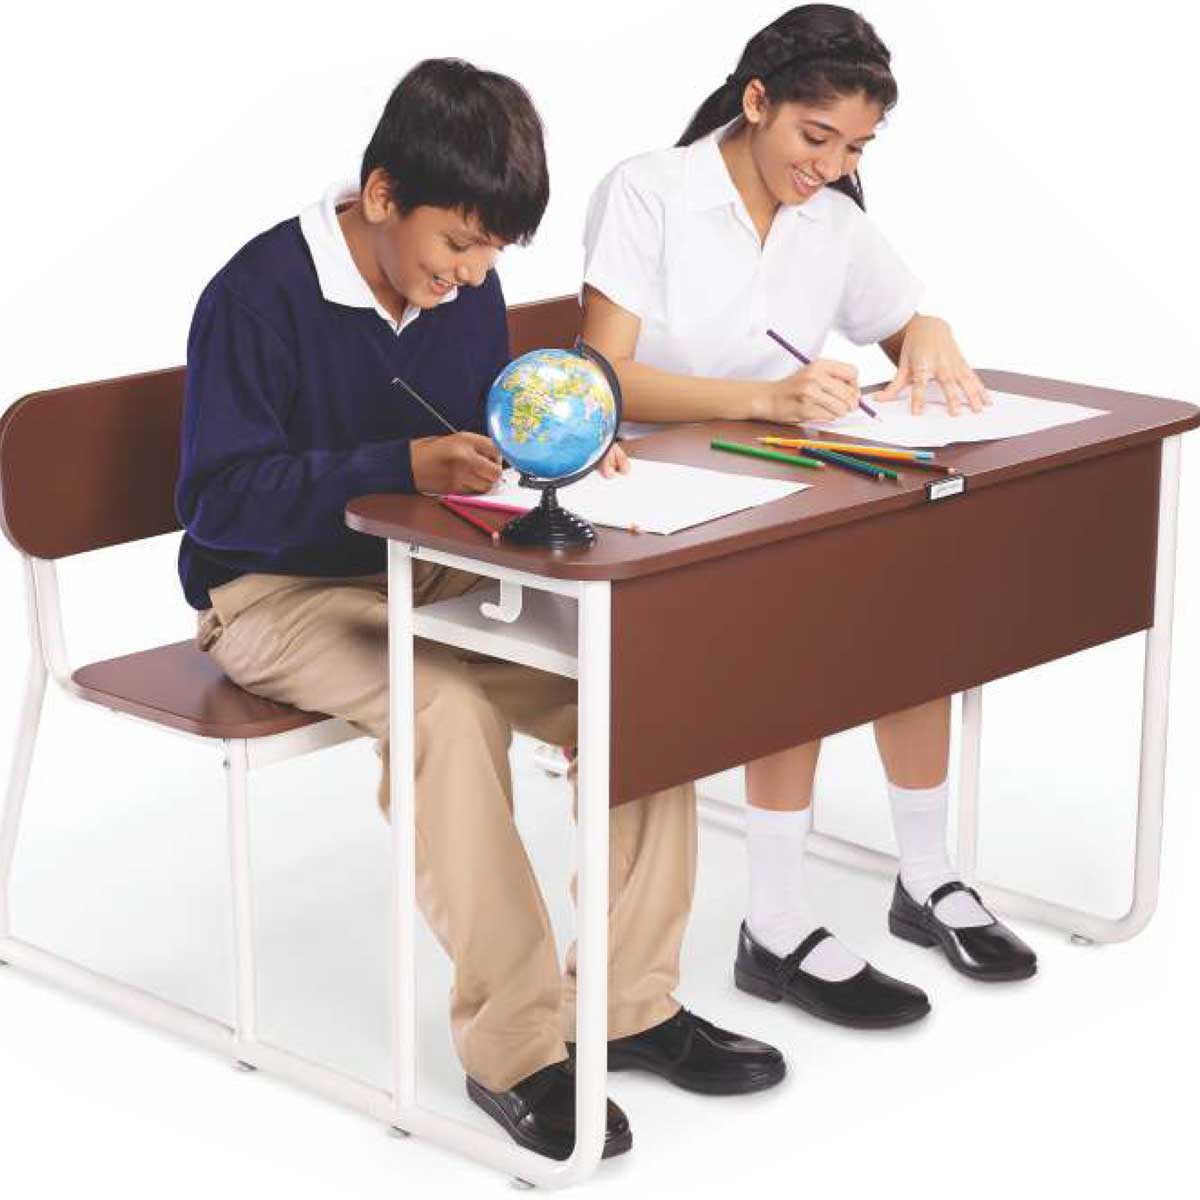 Writing Desk Manufacturers, Suppliers in Rohini Sector 23